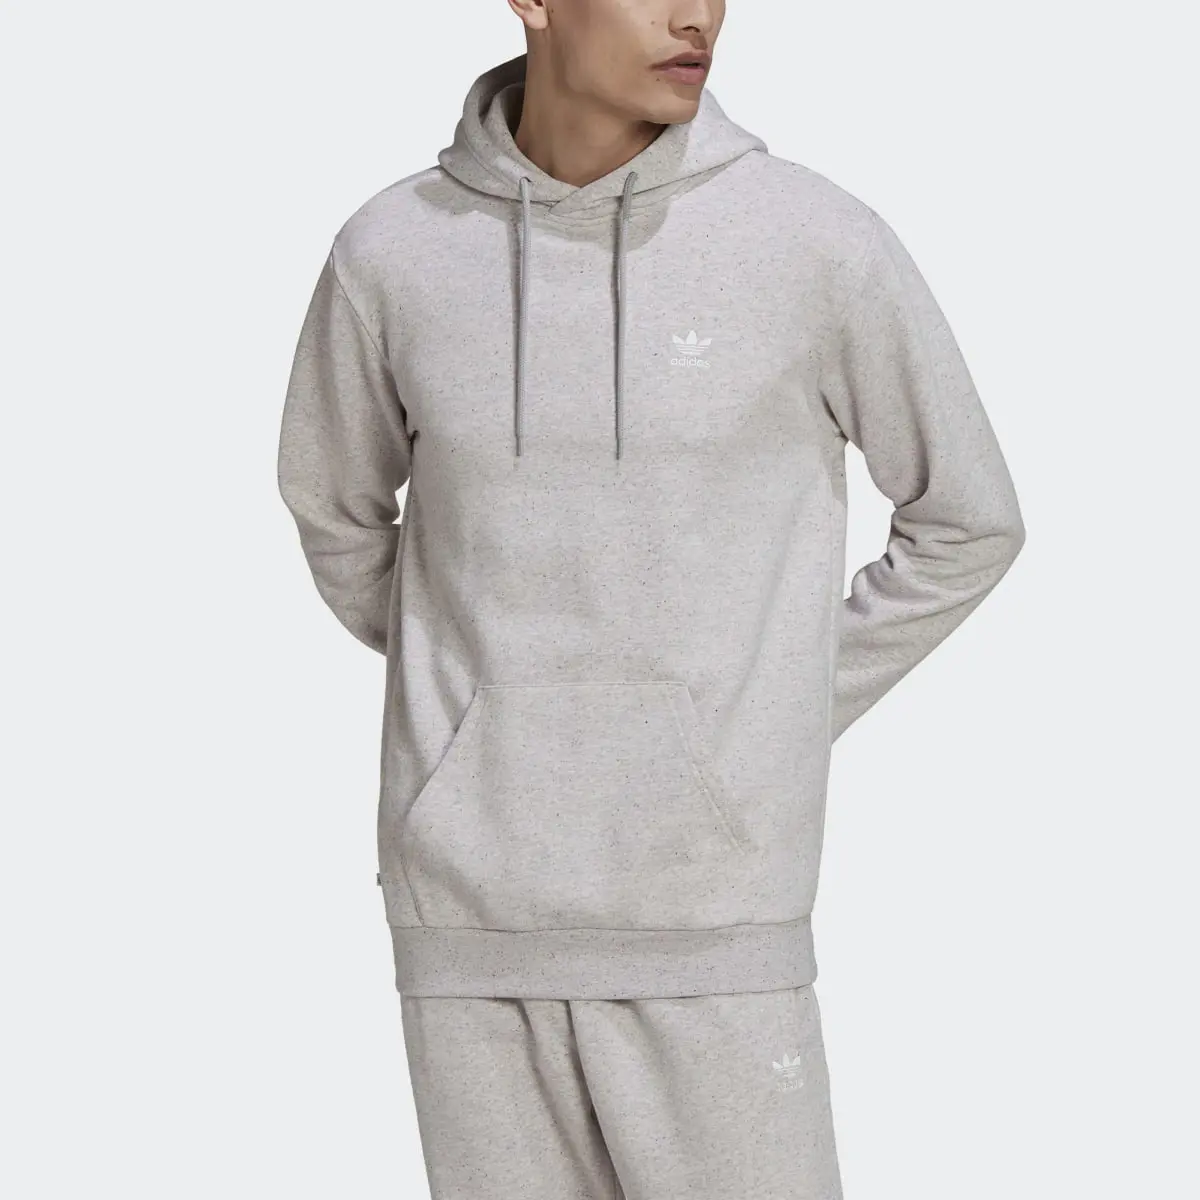 Adidas Essentials+ Made with Nature Hoodie. 1